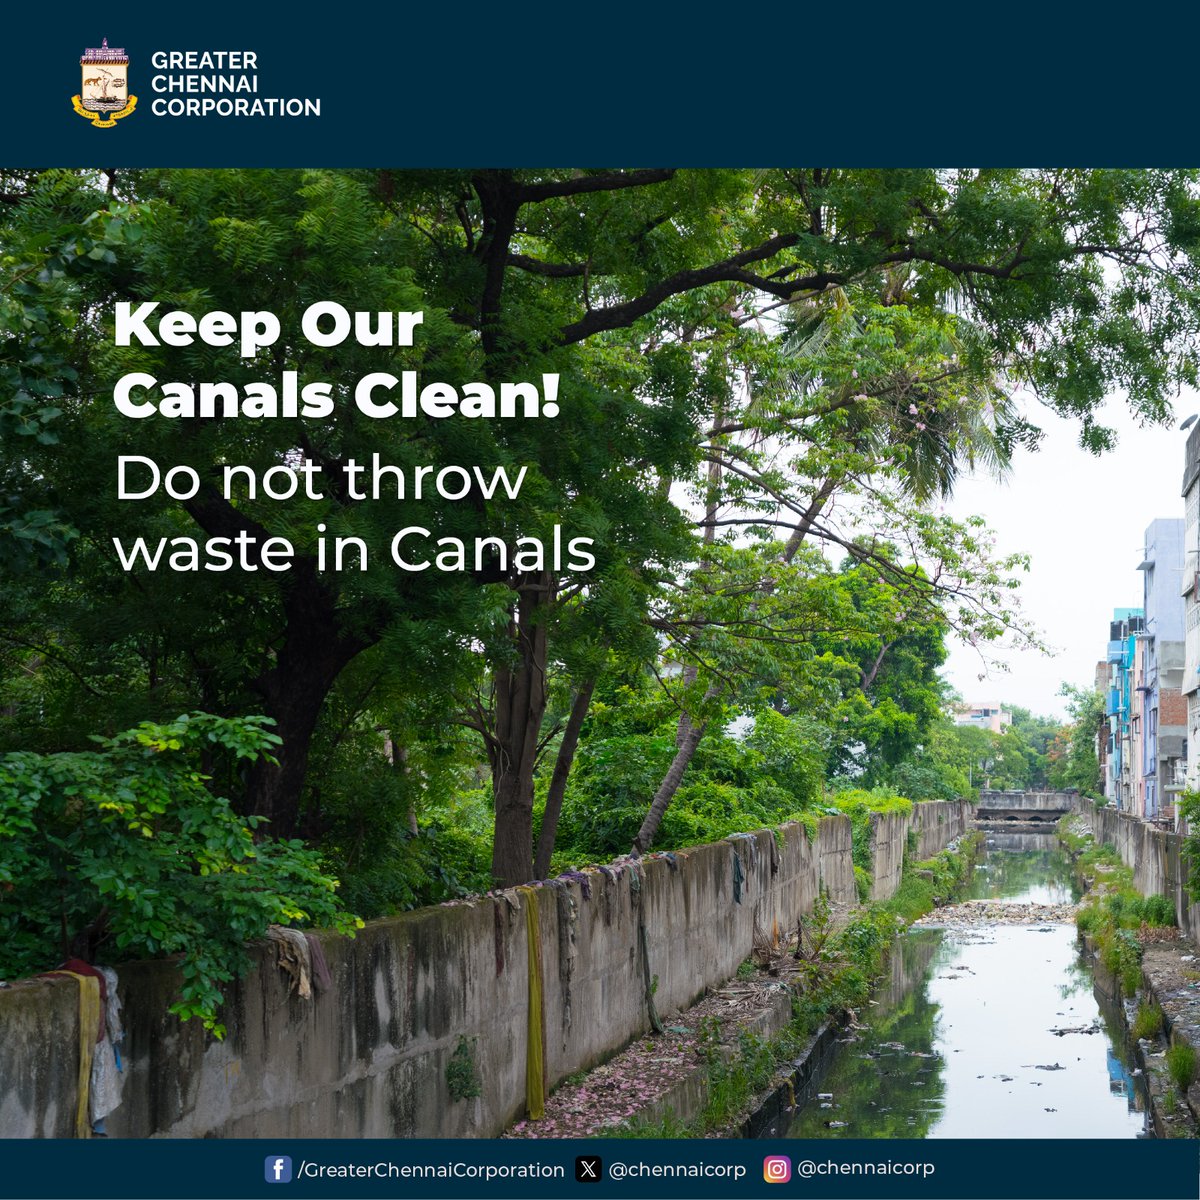 Dear #Chennaiites,

Keep our canals clean! Let's protect our waterways and the environment by disposing of waste properly. Say no to littering in public places.

@RAKRI1 
#ChennaiCorporation
#HeretoServe